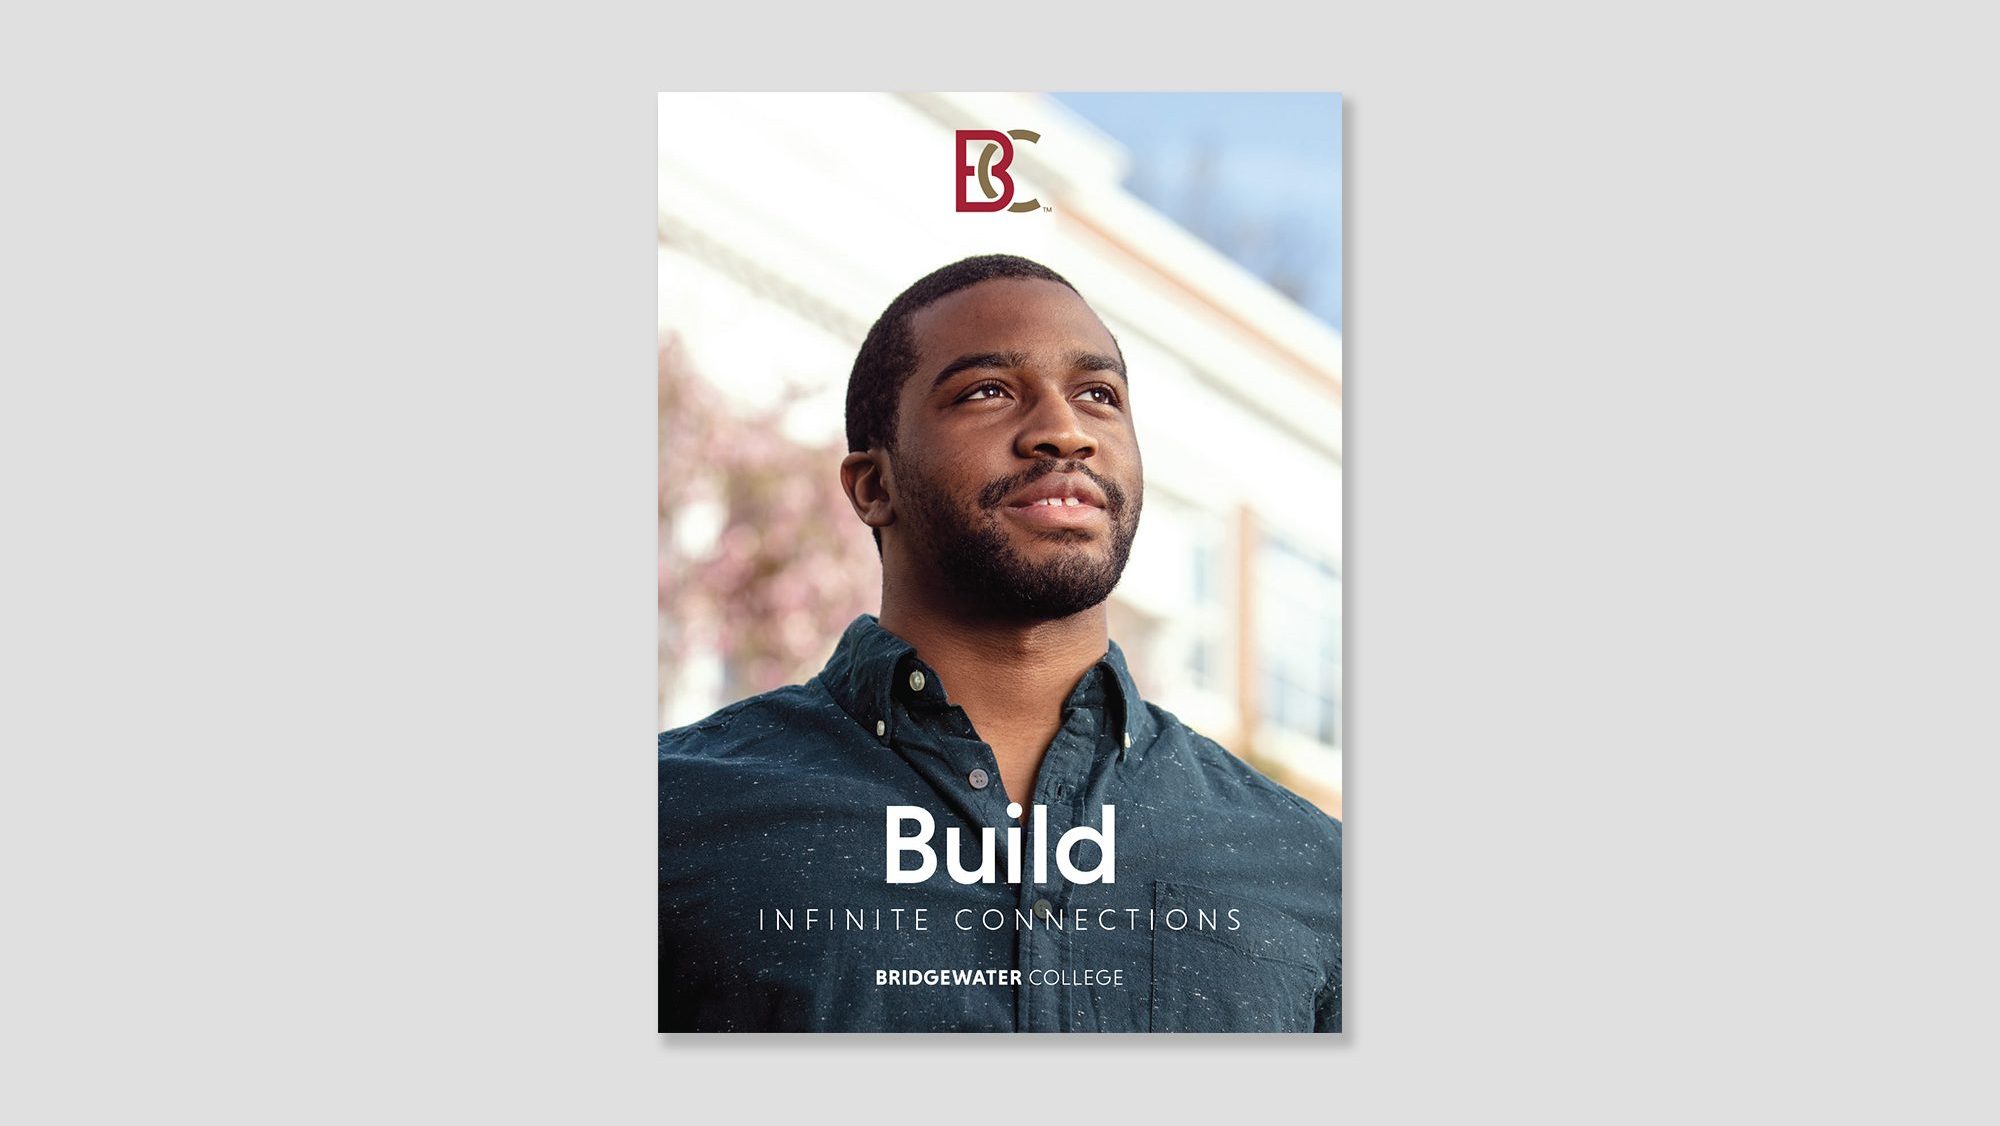 Brochure cover showing a young black man. Image text: Build infinite connections.